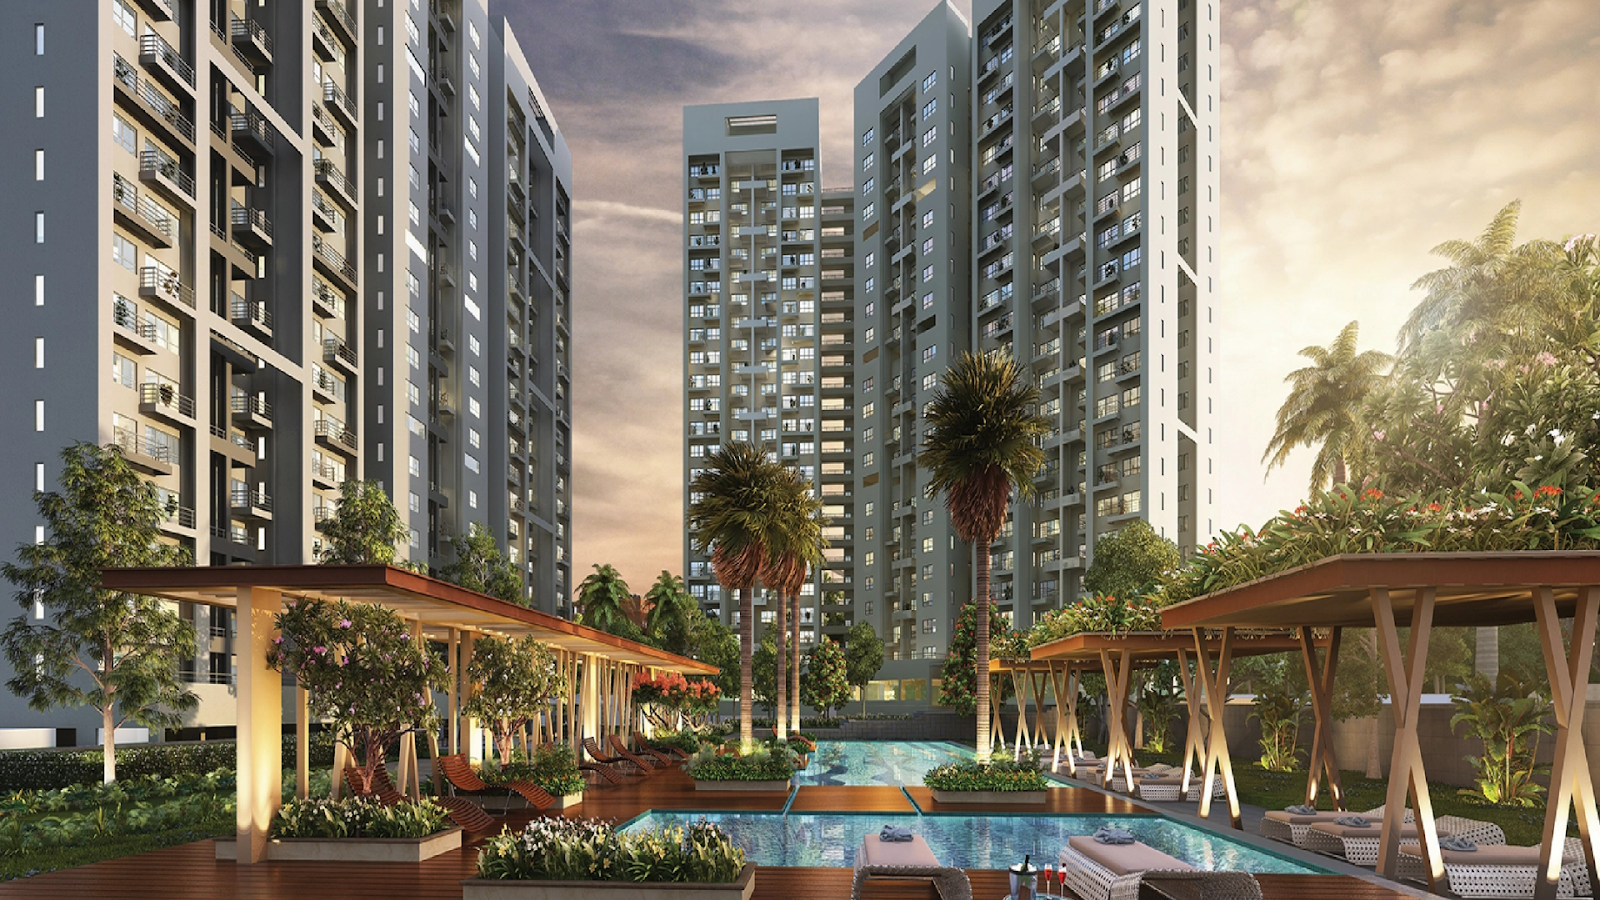 One of the most iconic projects going to be built is Godrej Infinity in the Pune location.